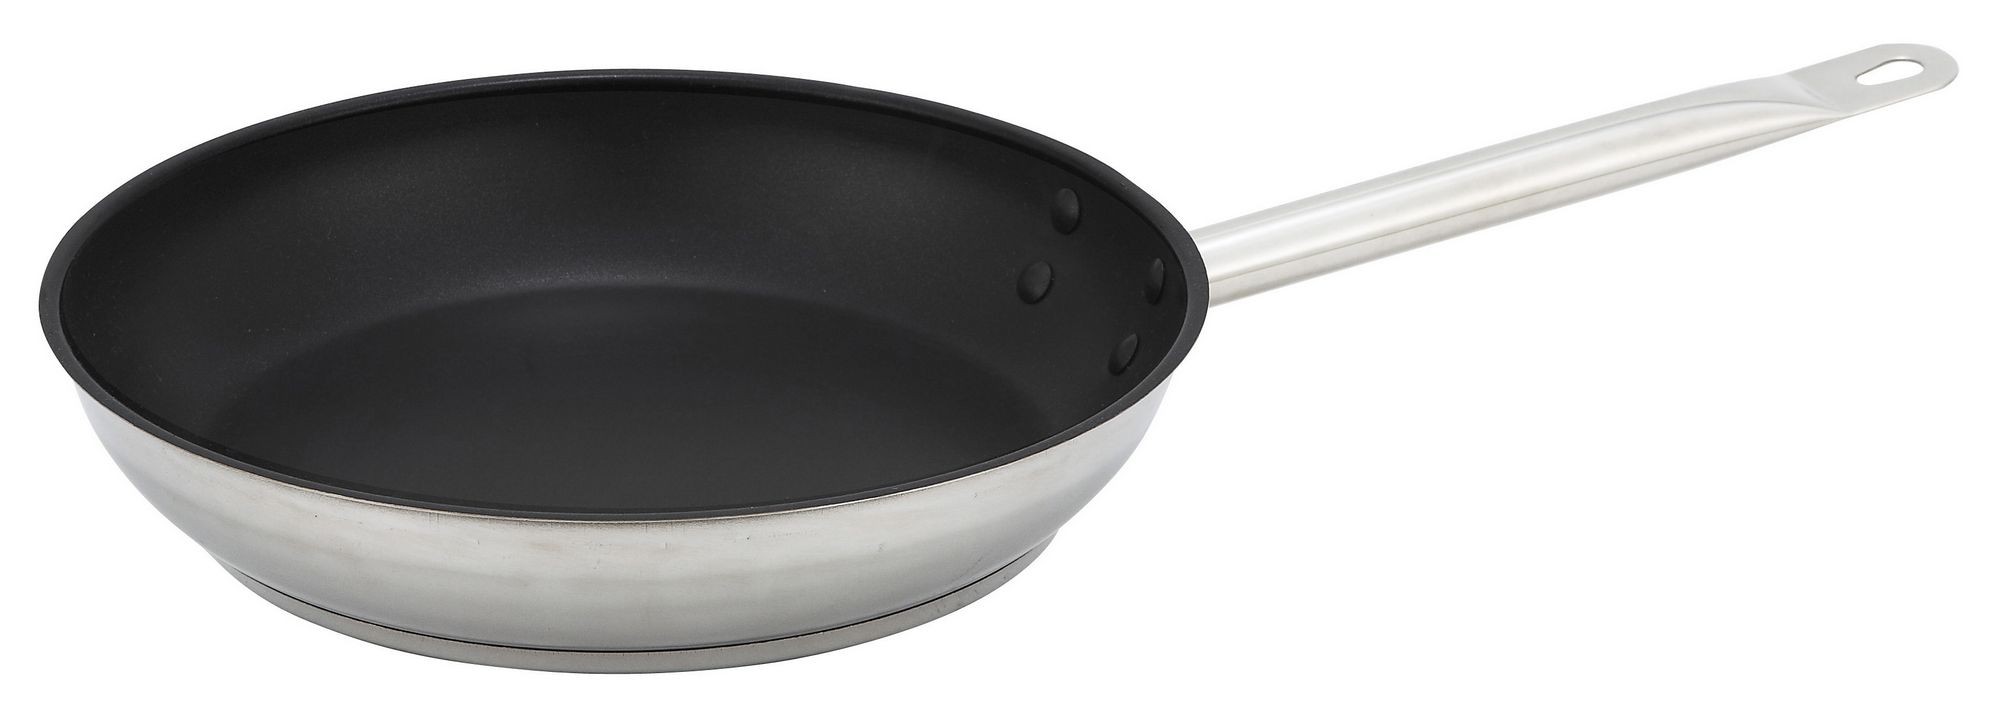 Winco SSFP-11NS Non-Stick Induction Fry Pan 11"